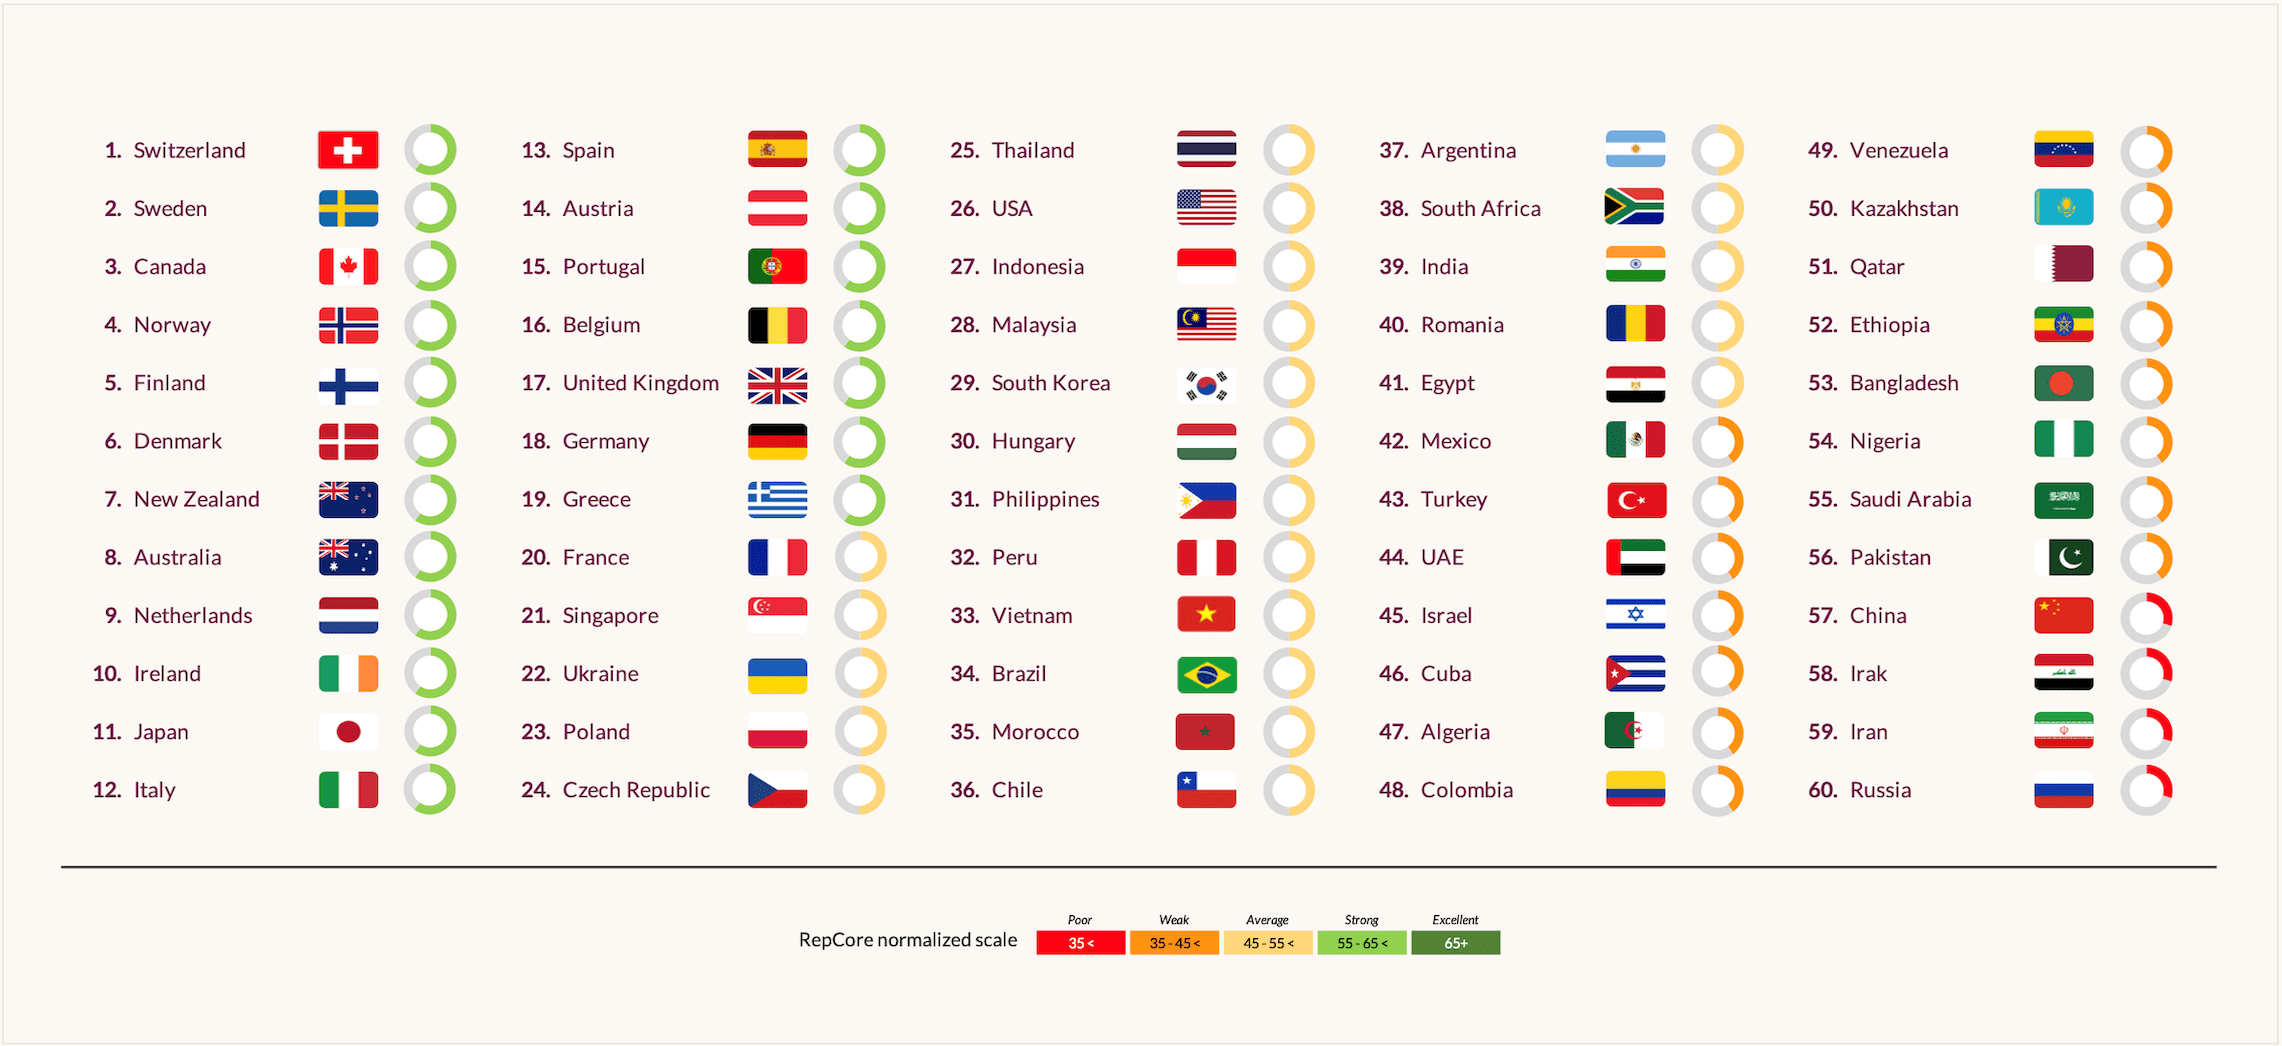 The reputation of the 60 countries with the highest GDP (GDP60) in G7. The top 10 countries are Switzerland, Sweden, Canada, Norway, Finland, Denmark, New Zealand, Australia, the Netherlands, and Ireland.